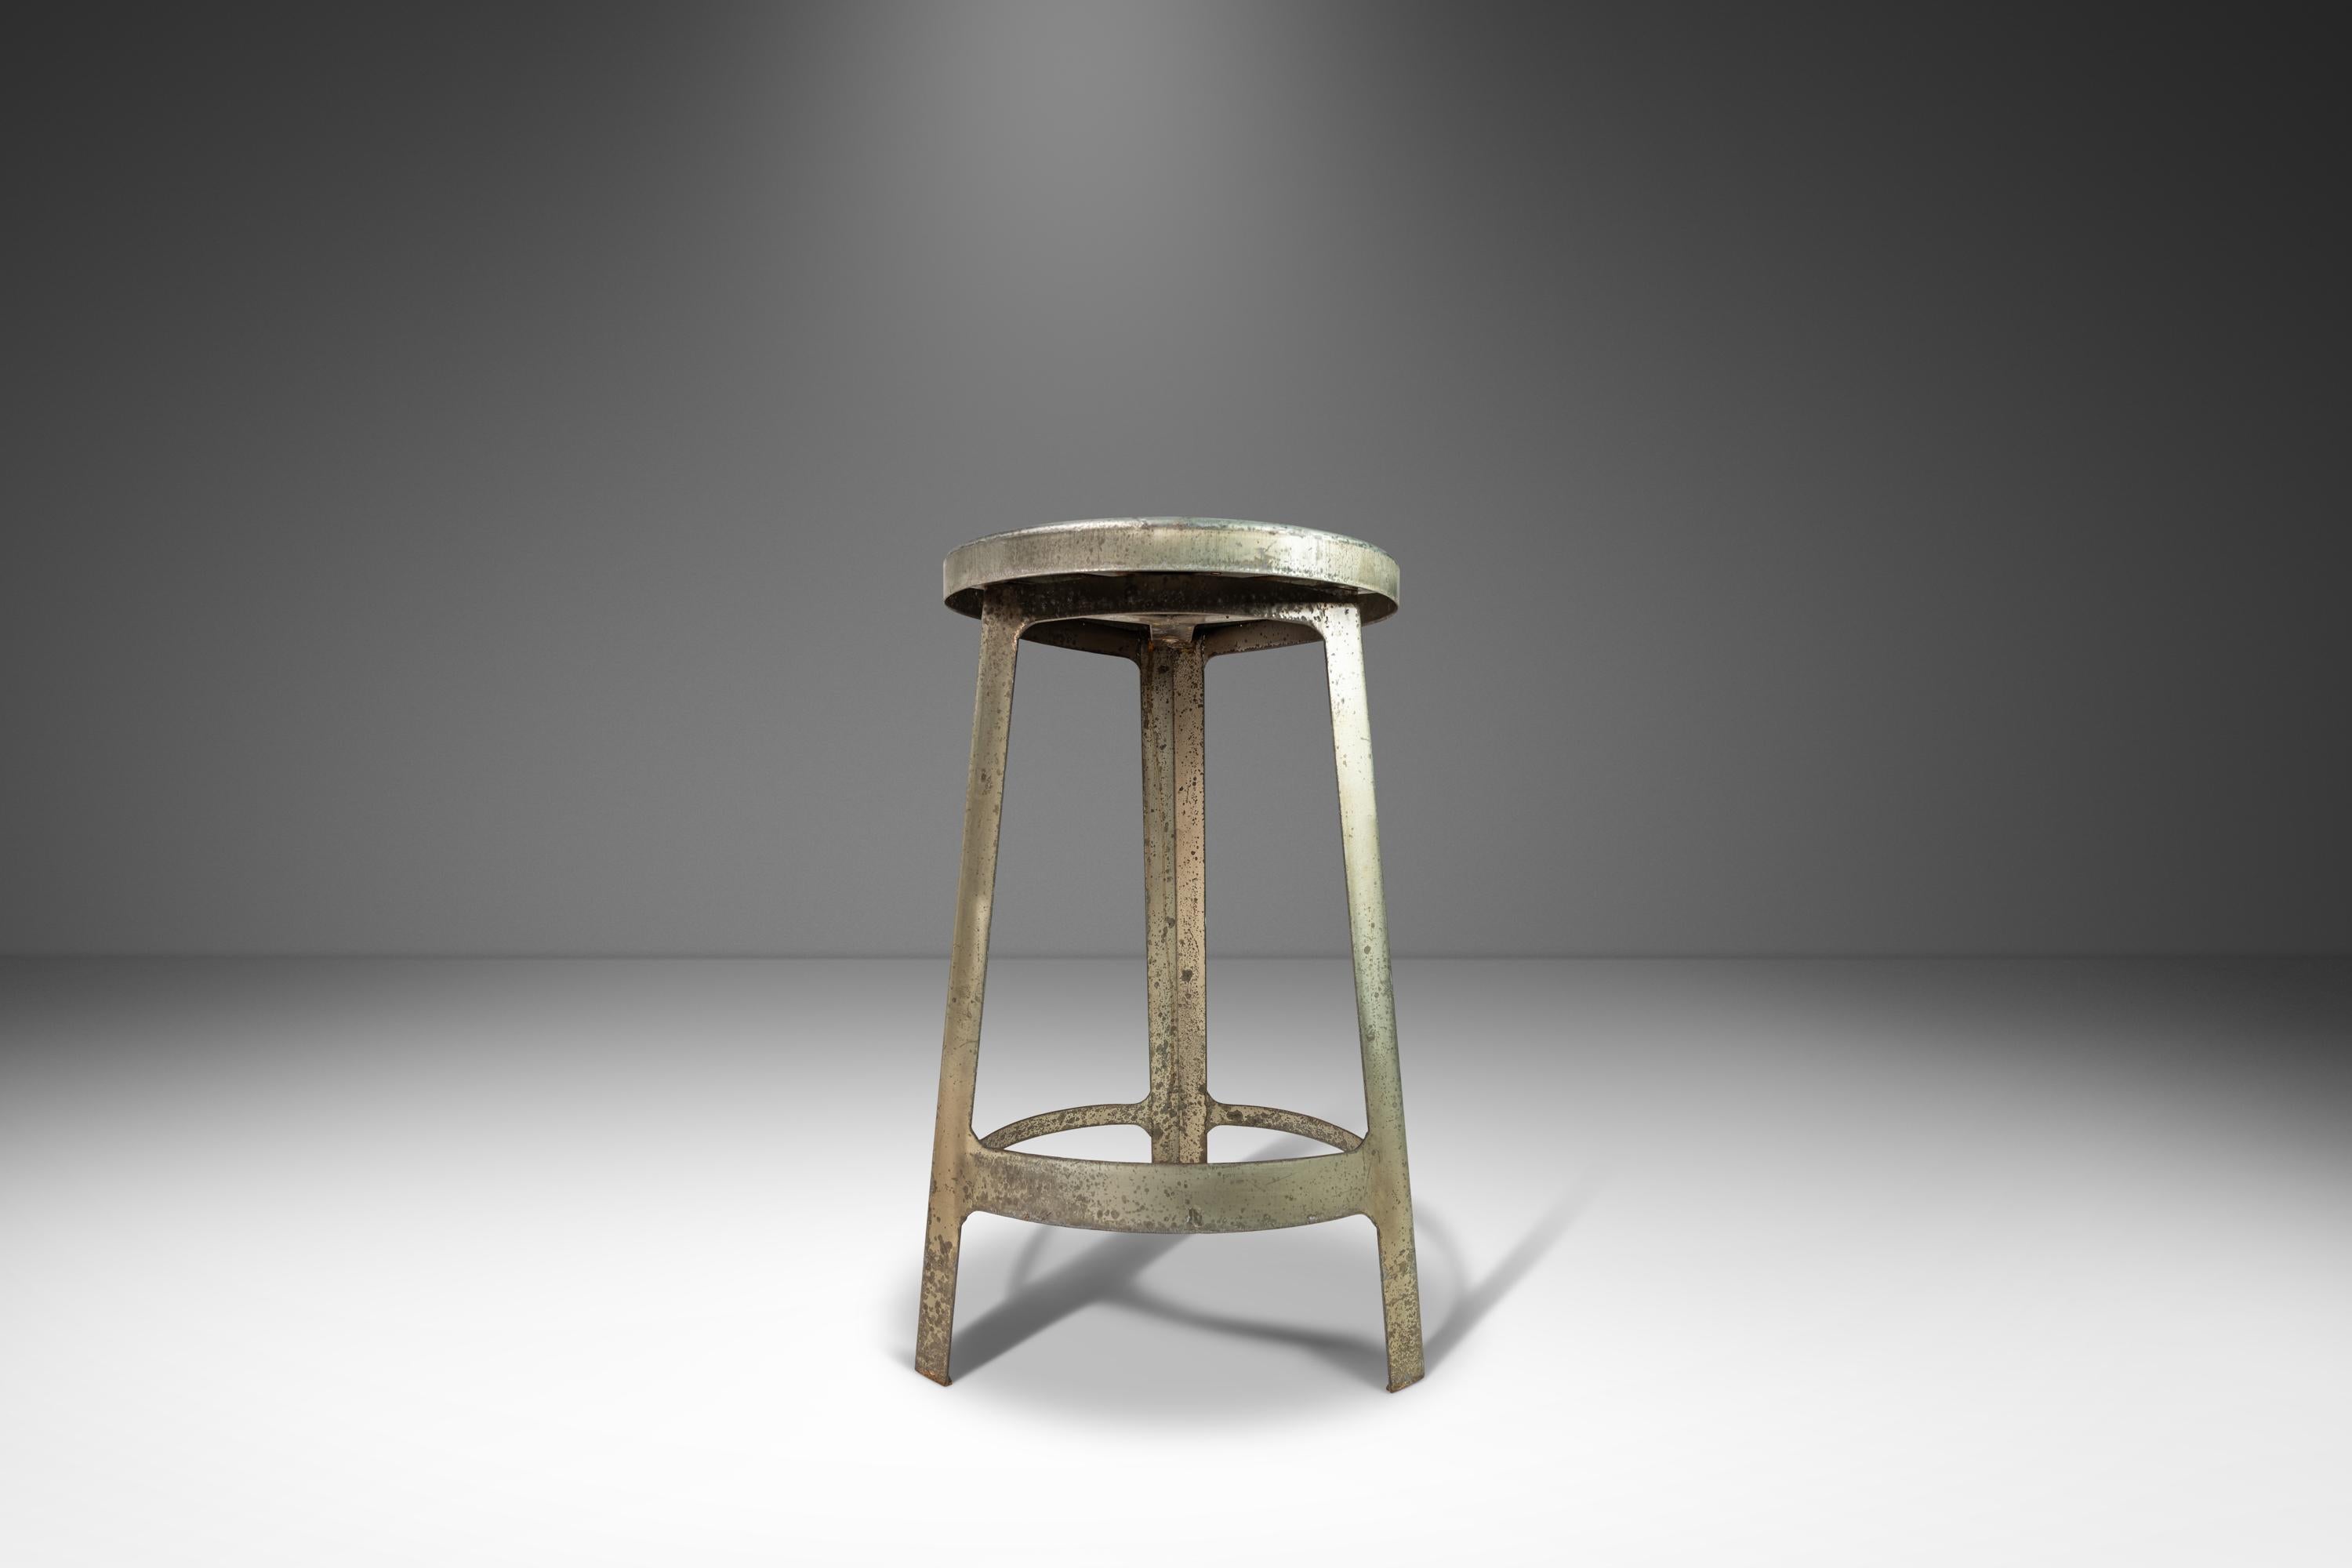 Aluminum Set of Four '4' Hammered Industrial Counter Height Bar Stools, France, C. 1950s For Sale